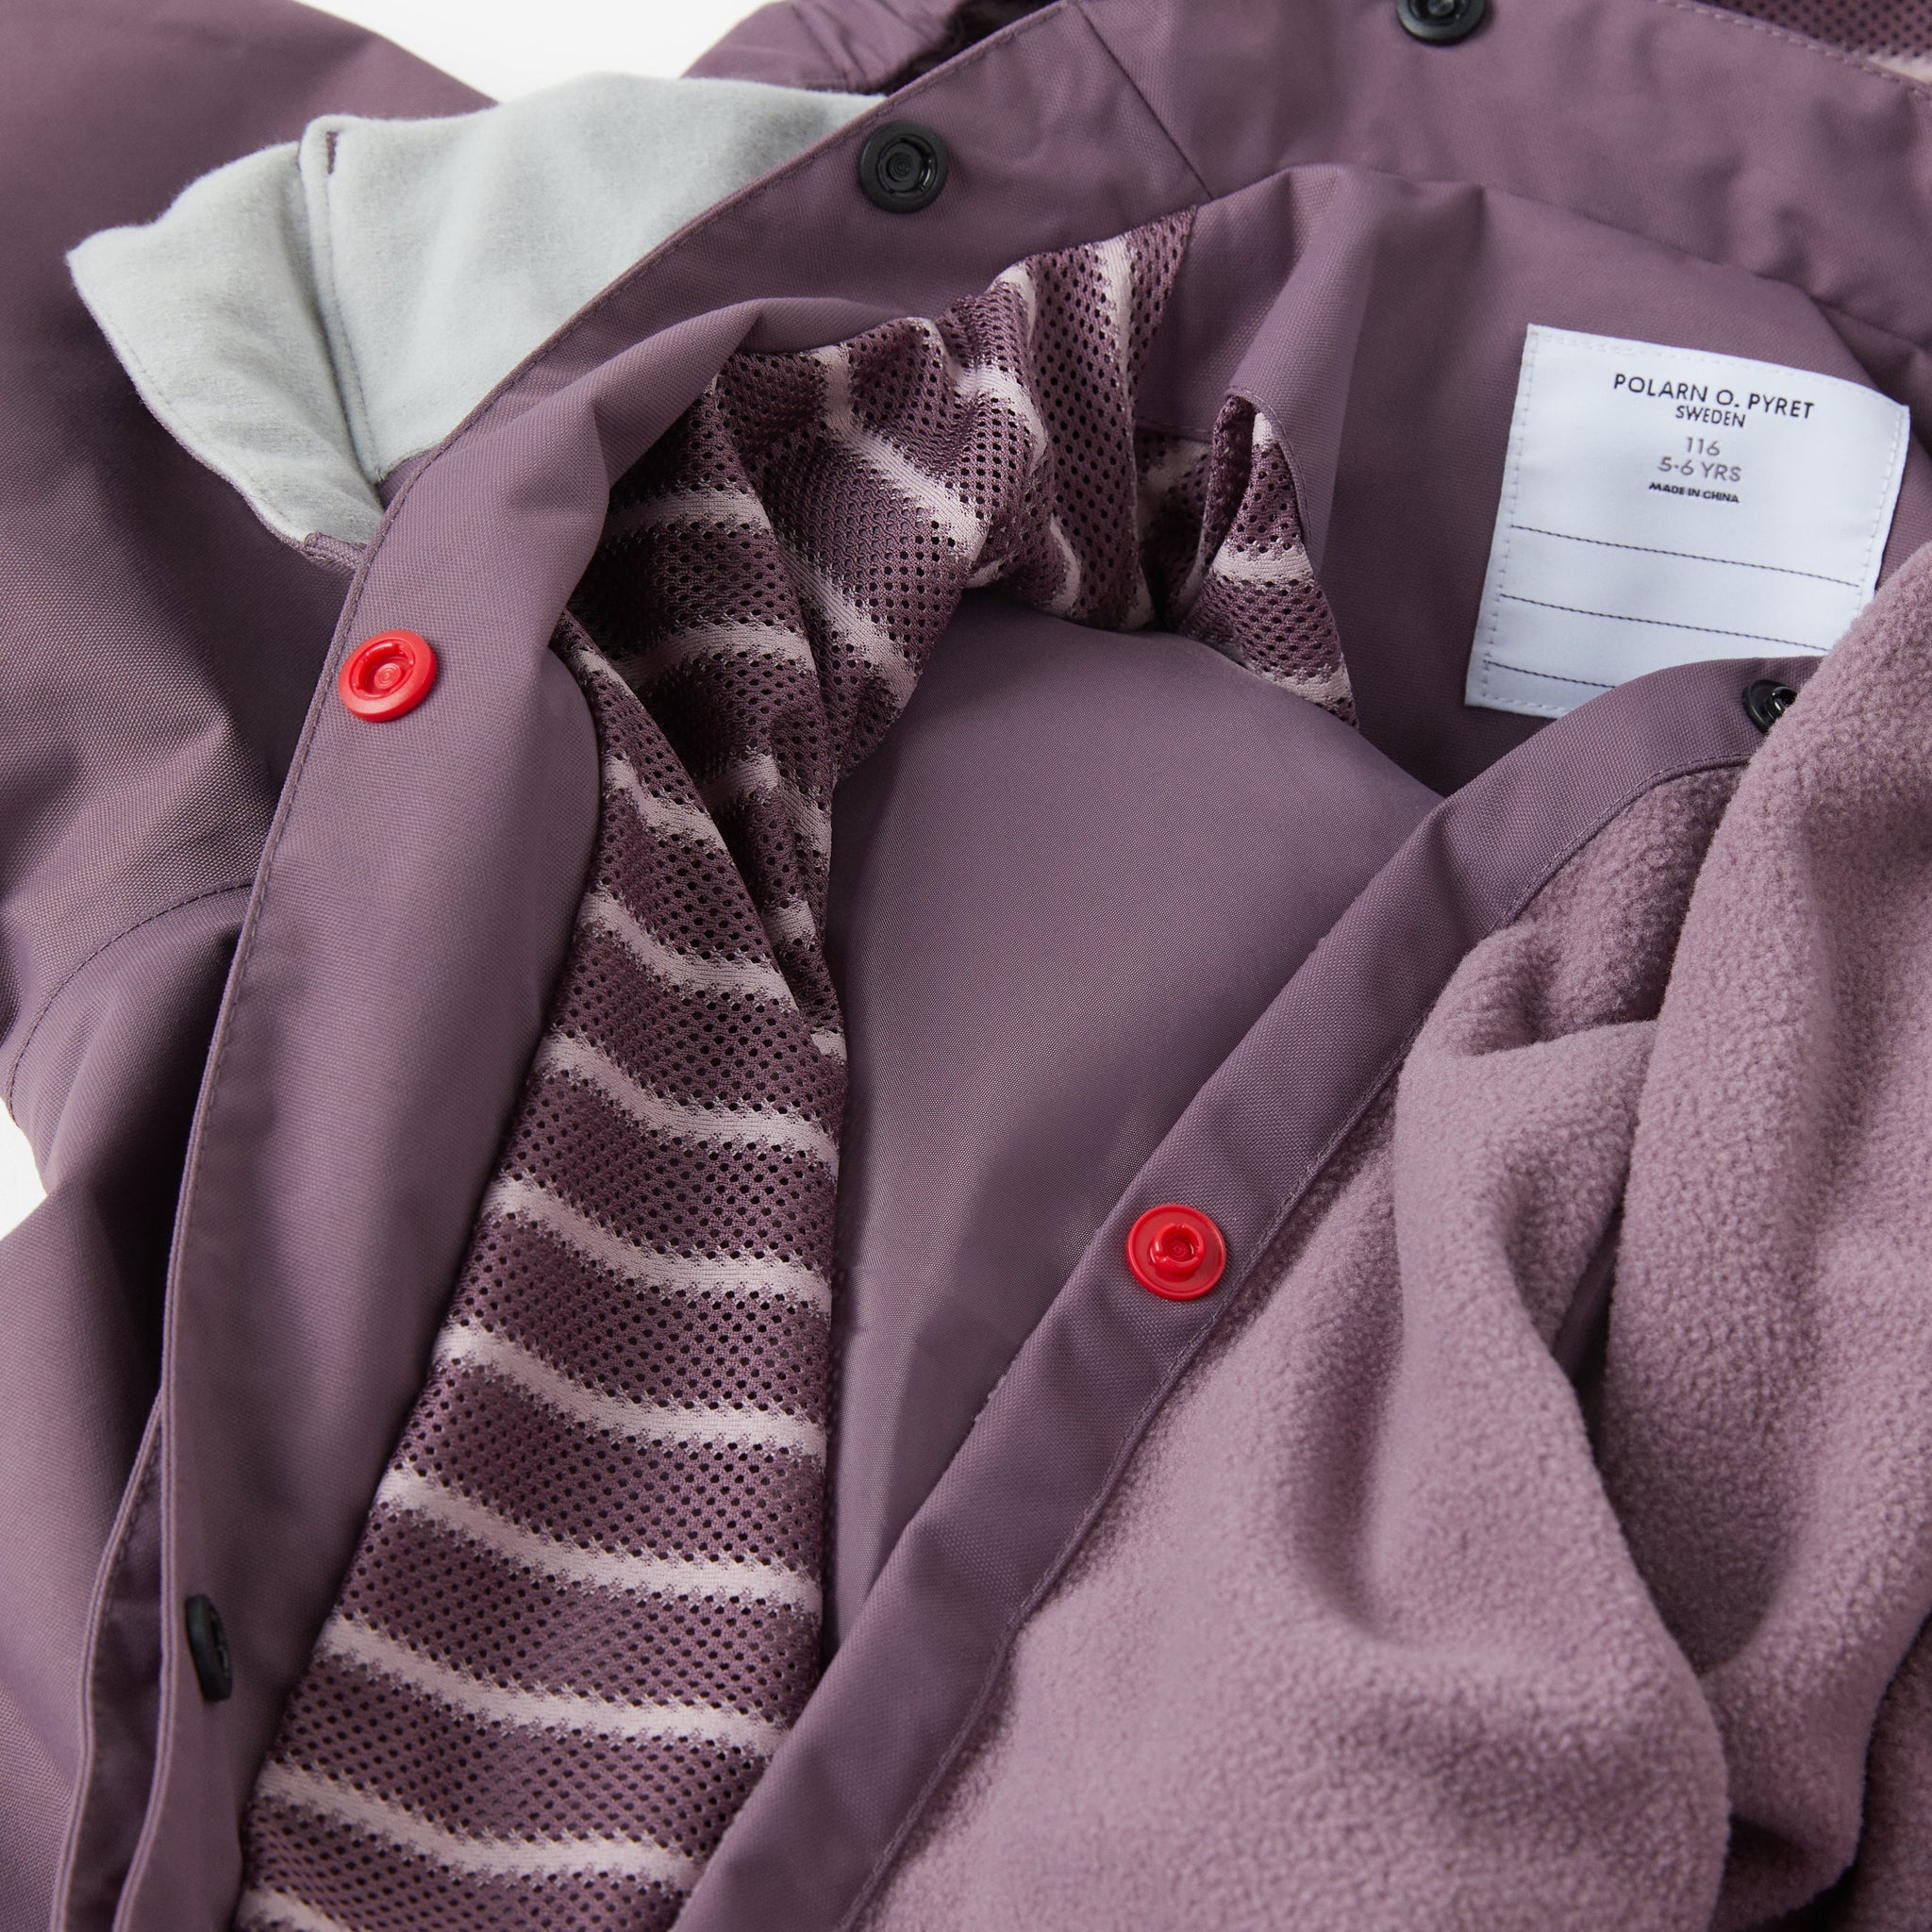 Purple Waterproof Kids Overall from the Polarn O. Pyret kidswear collection. The best ethical kids outerwear.